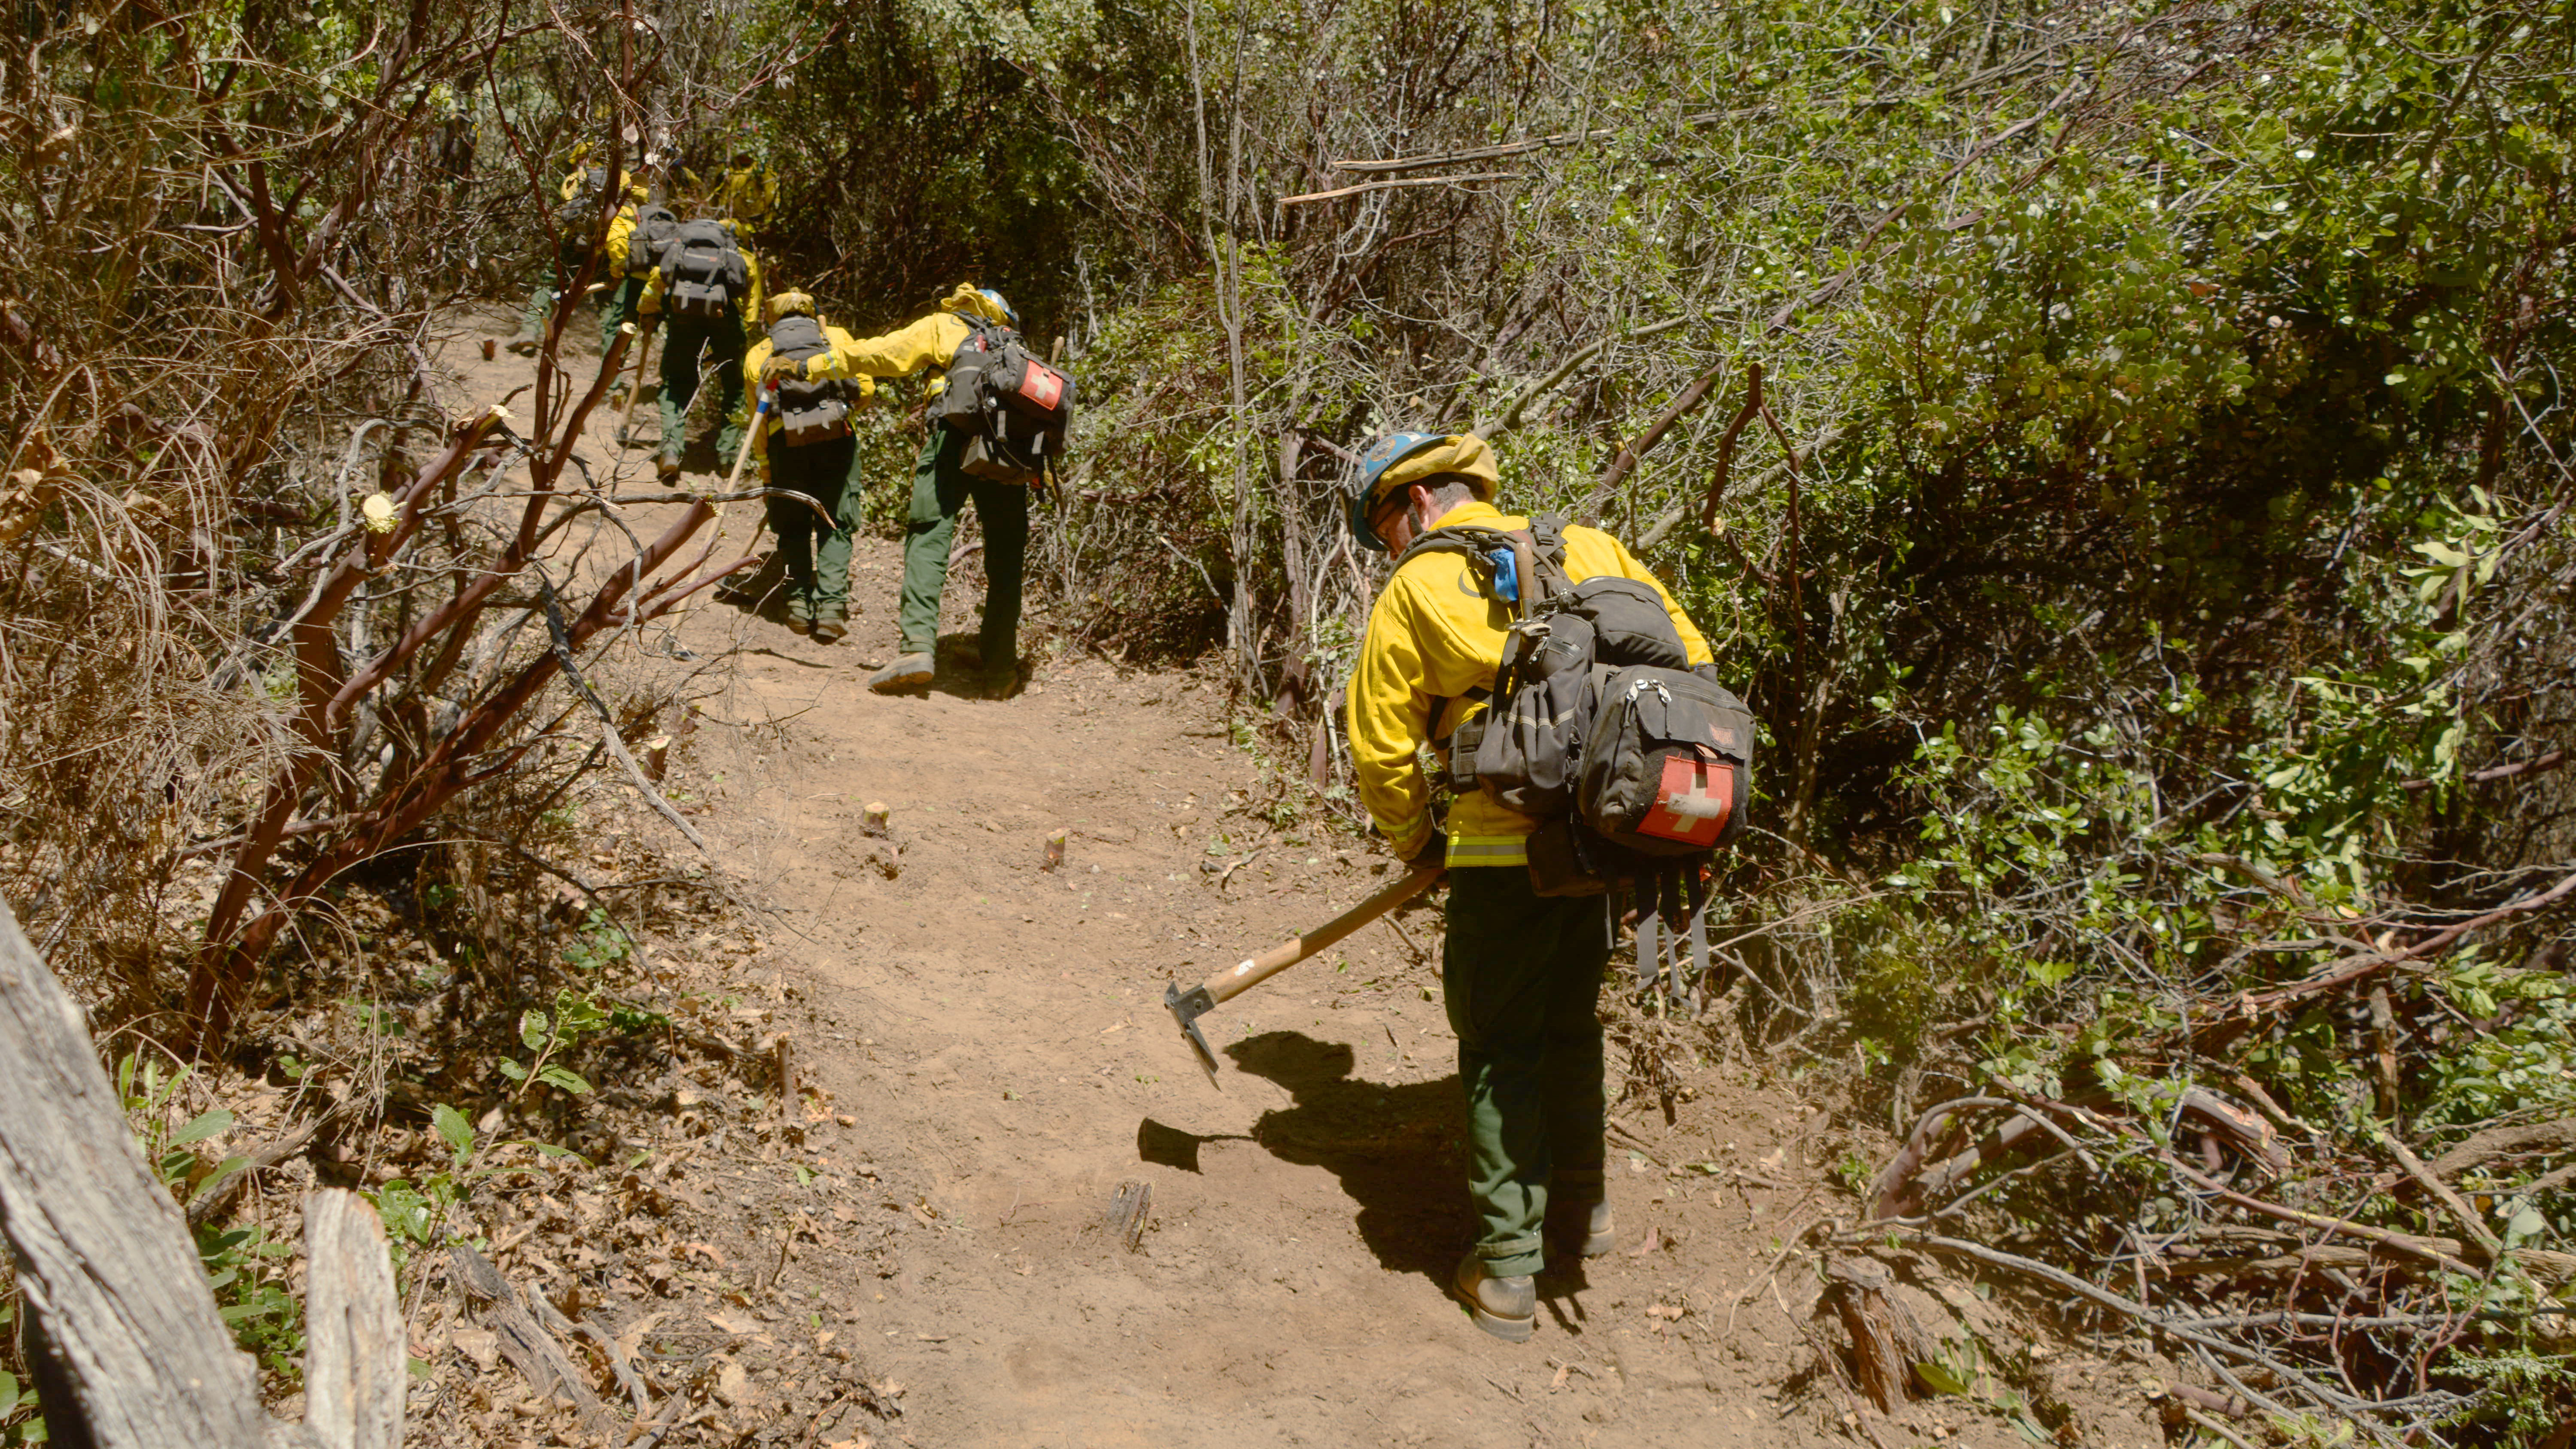 Corpsmembers in fire gear use hand tools to cut brush down to bare dirt